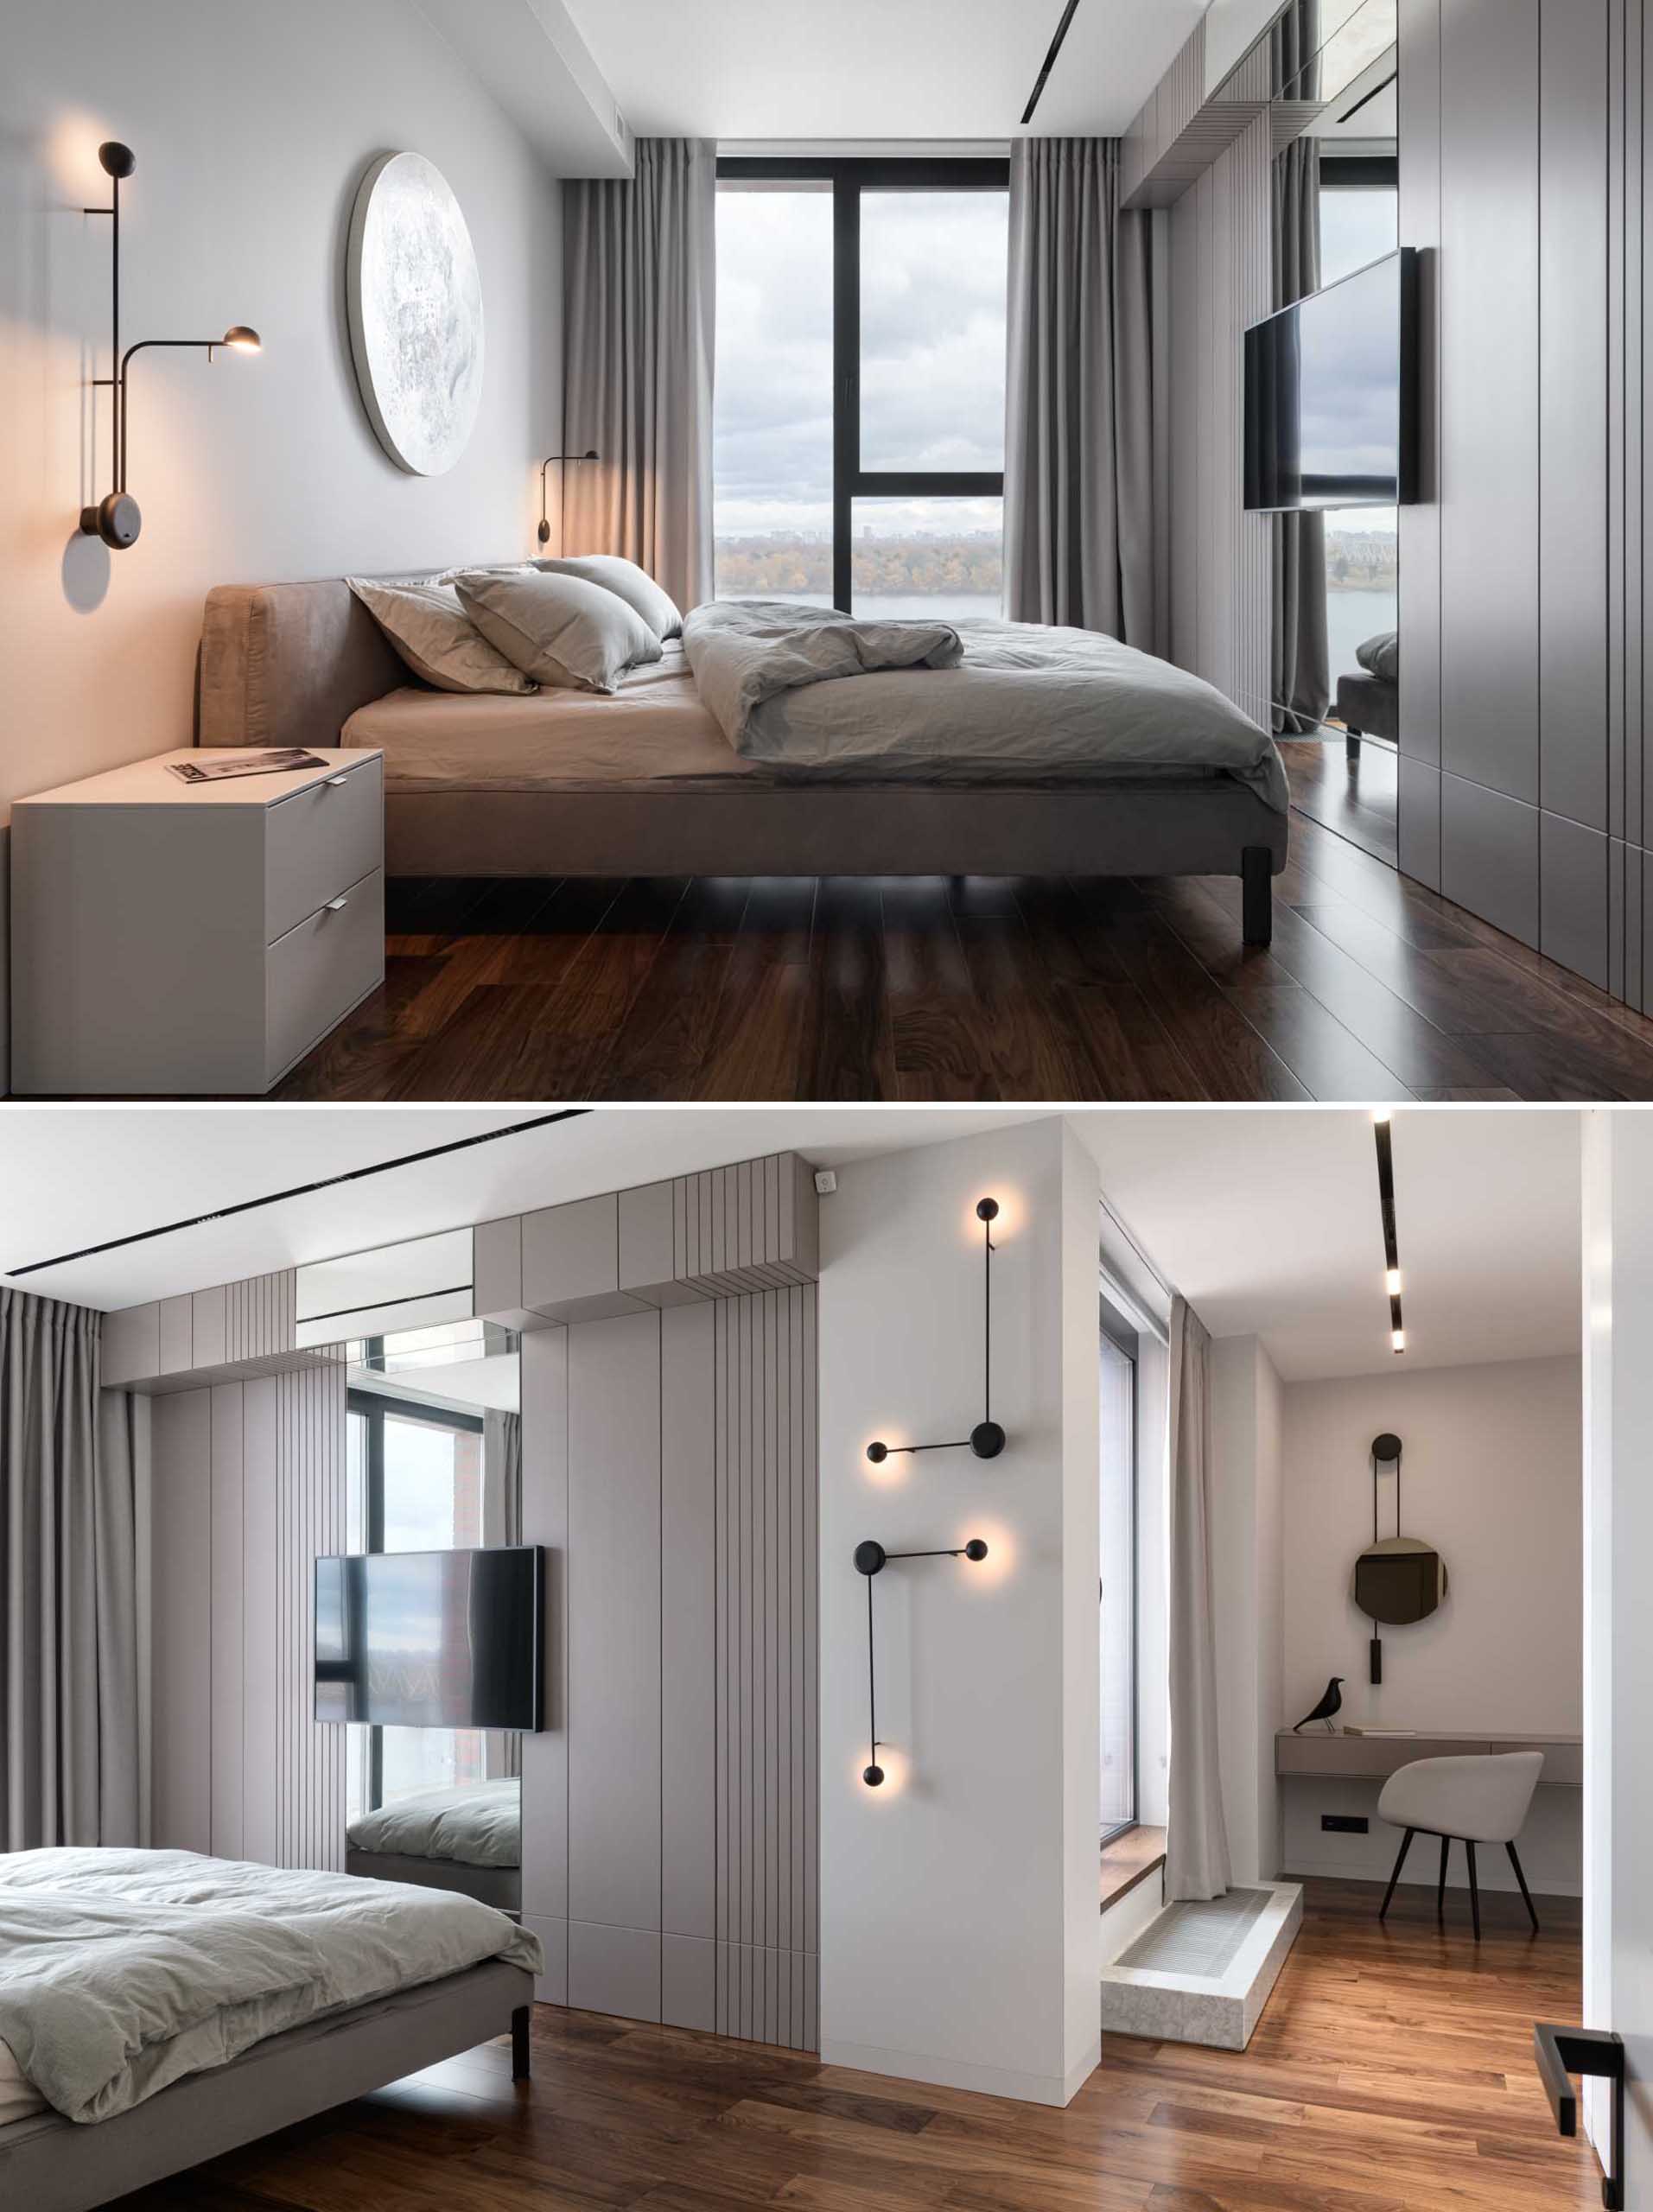 A modern bedroom with wall-mounted lighting.